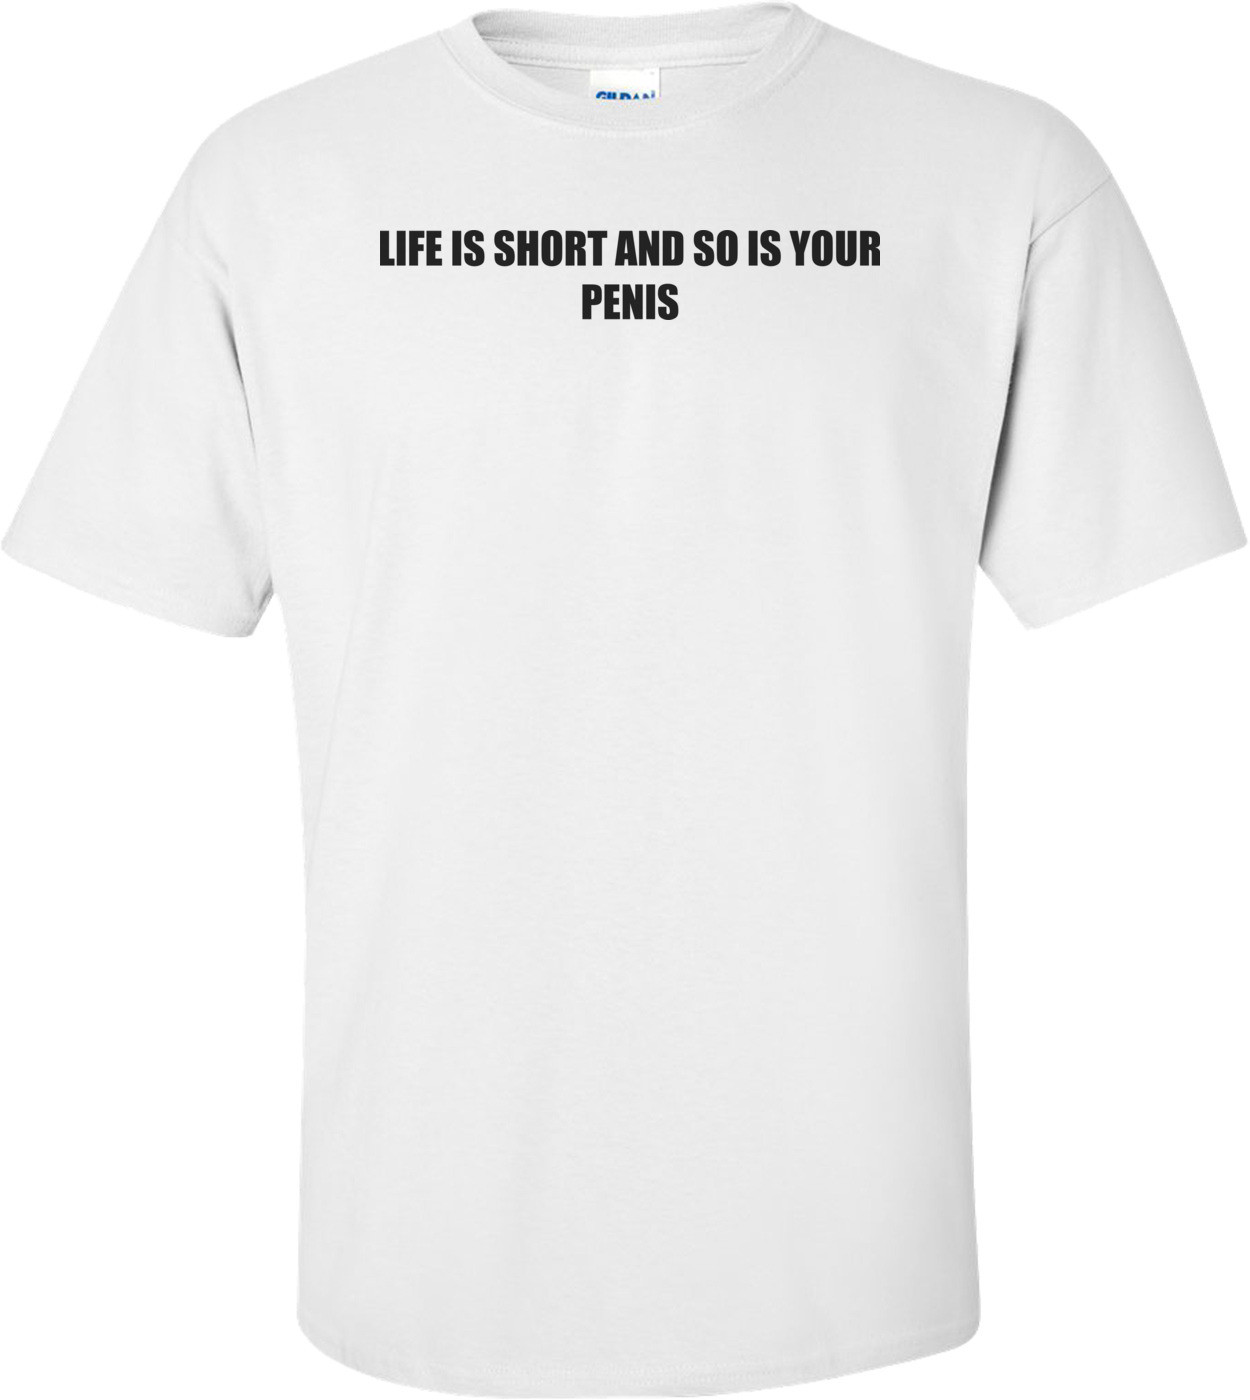 Life Is Short And So Is Your Penis Shirt